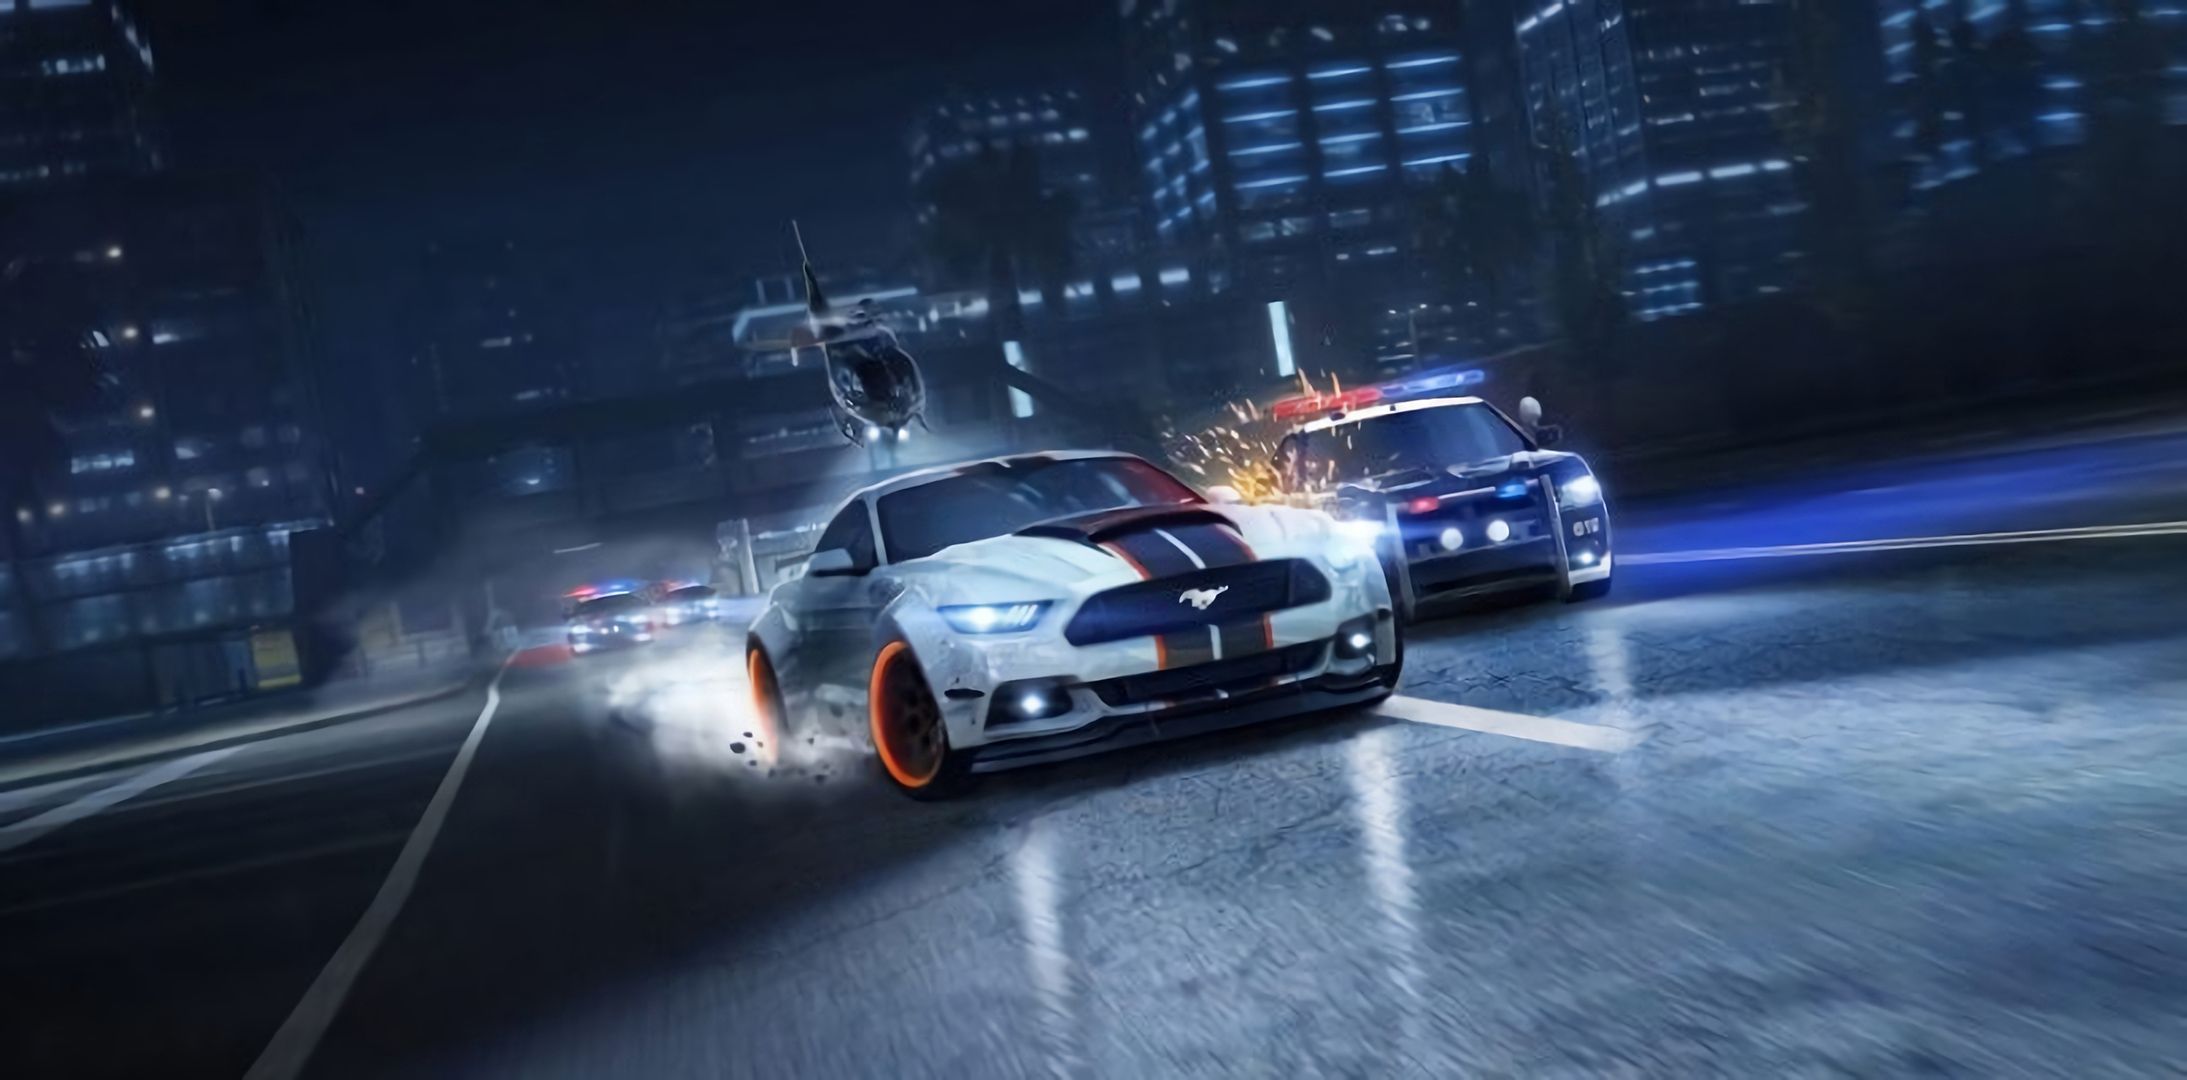 Need For Speed Heat 2019 Game, HD Games, 4k Wallpaper, Image